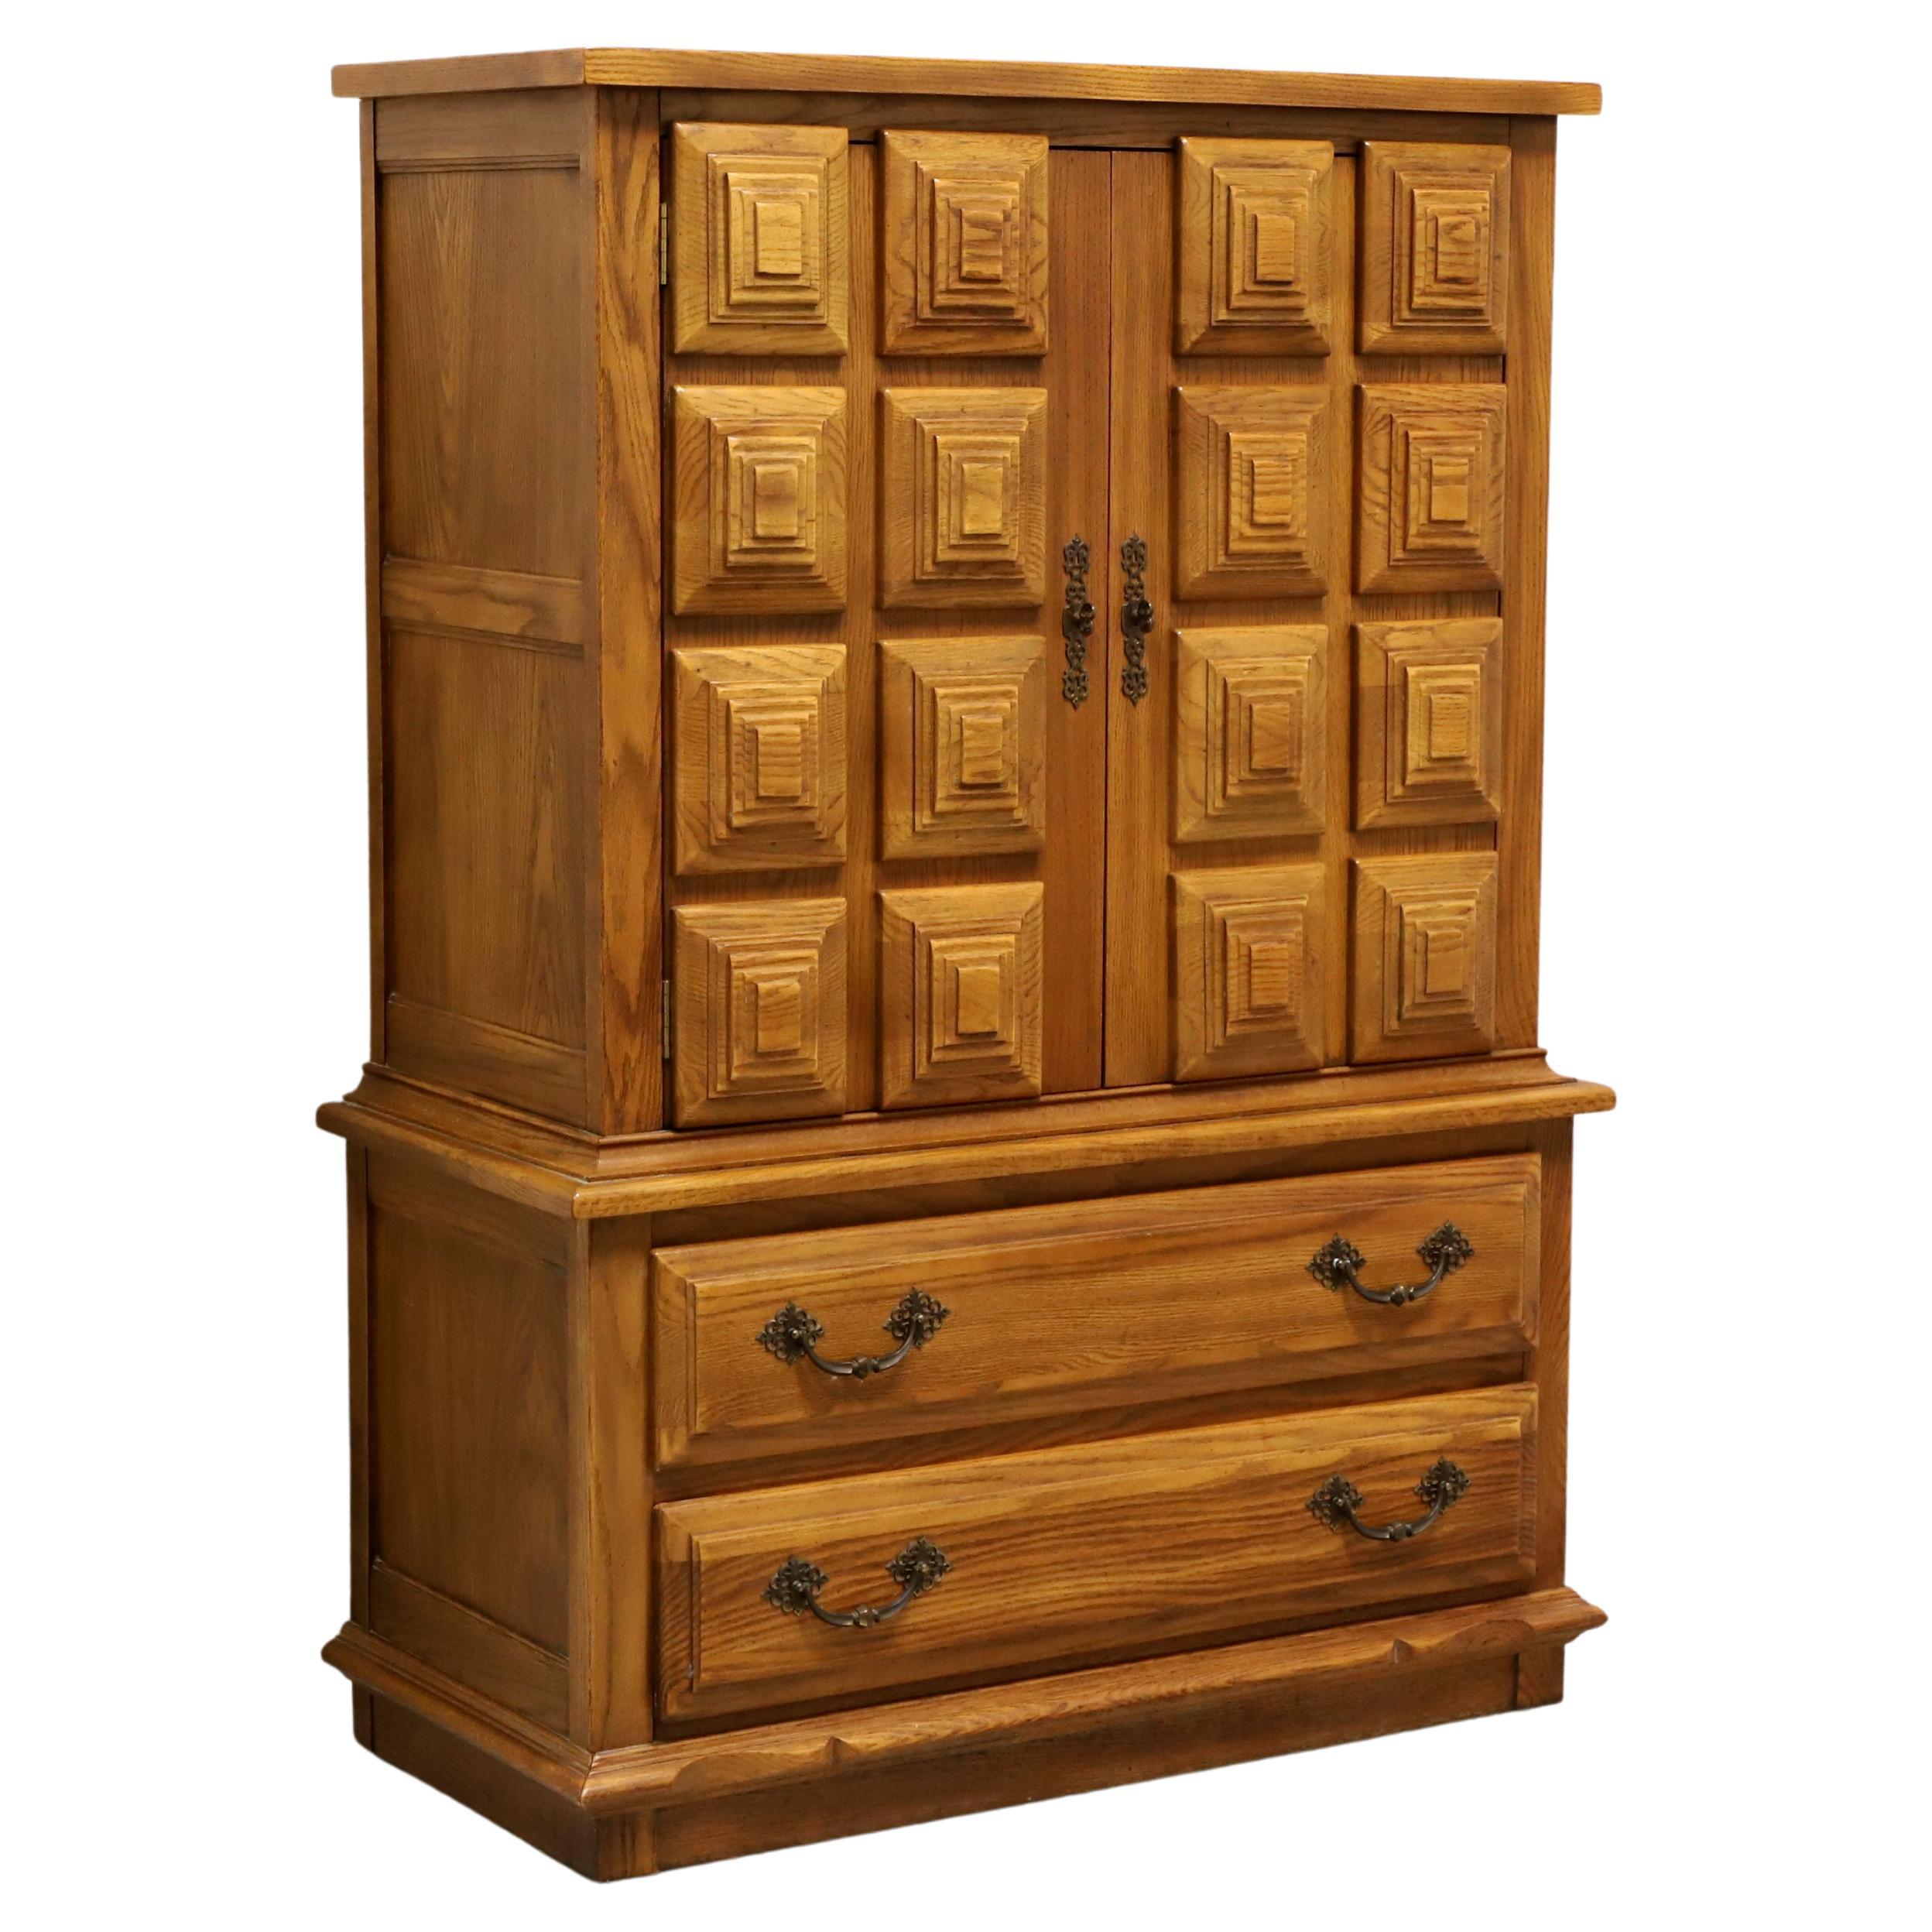 LINK-TAYLOR Espanol Oak Spanish Colonial Style Gentleman's Chest For Sale